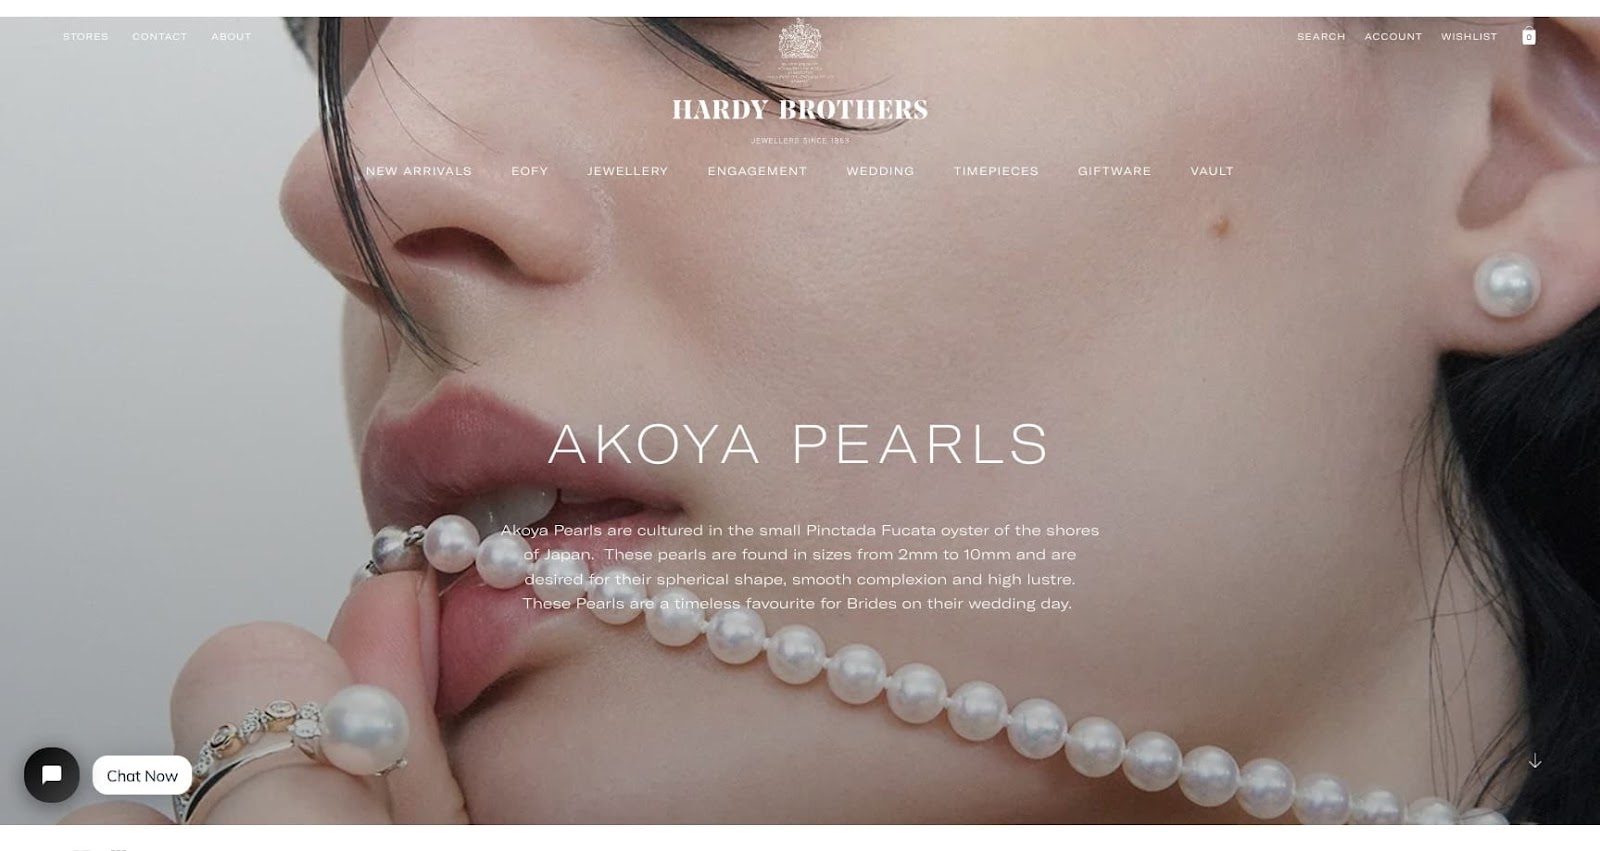 hardy brothers akoya pearls collection page full screen product photo